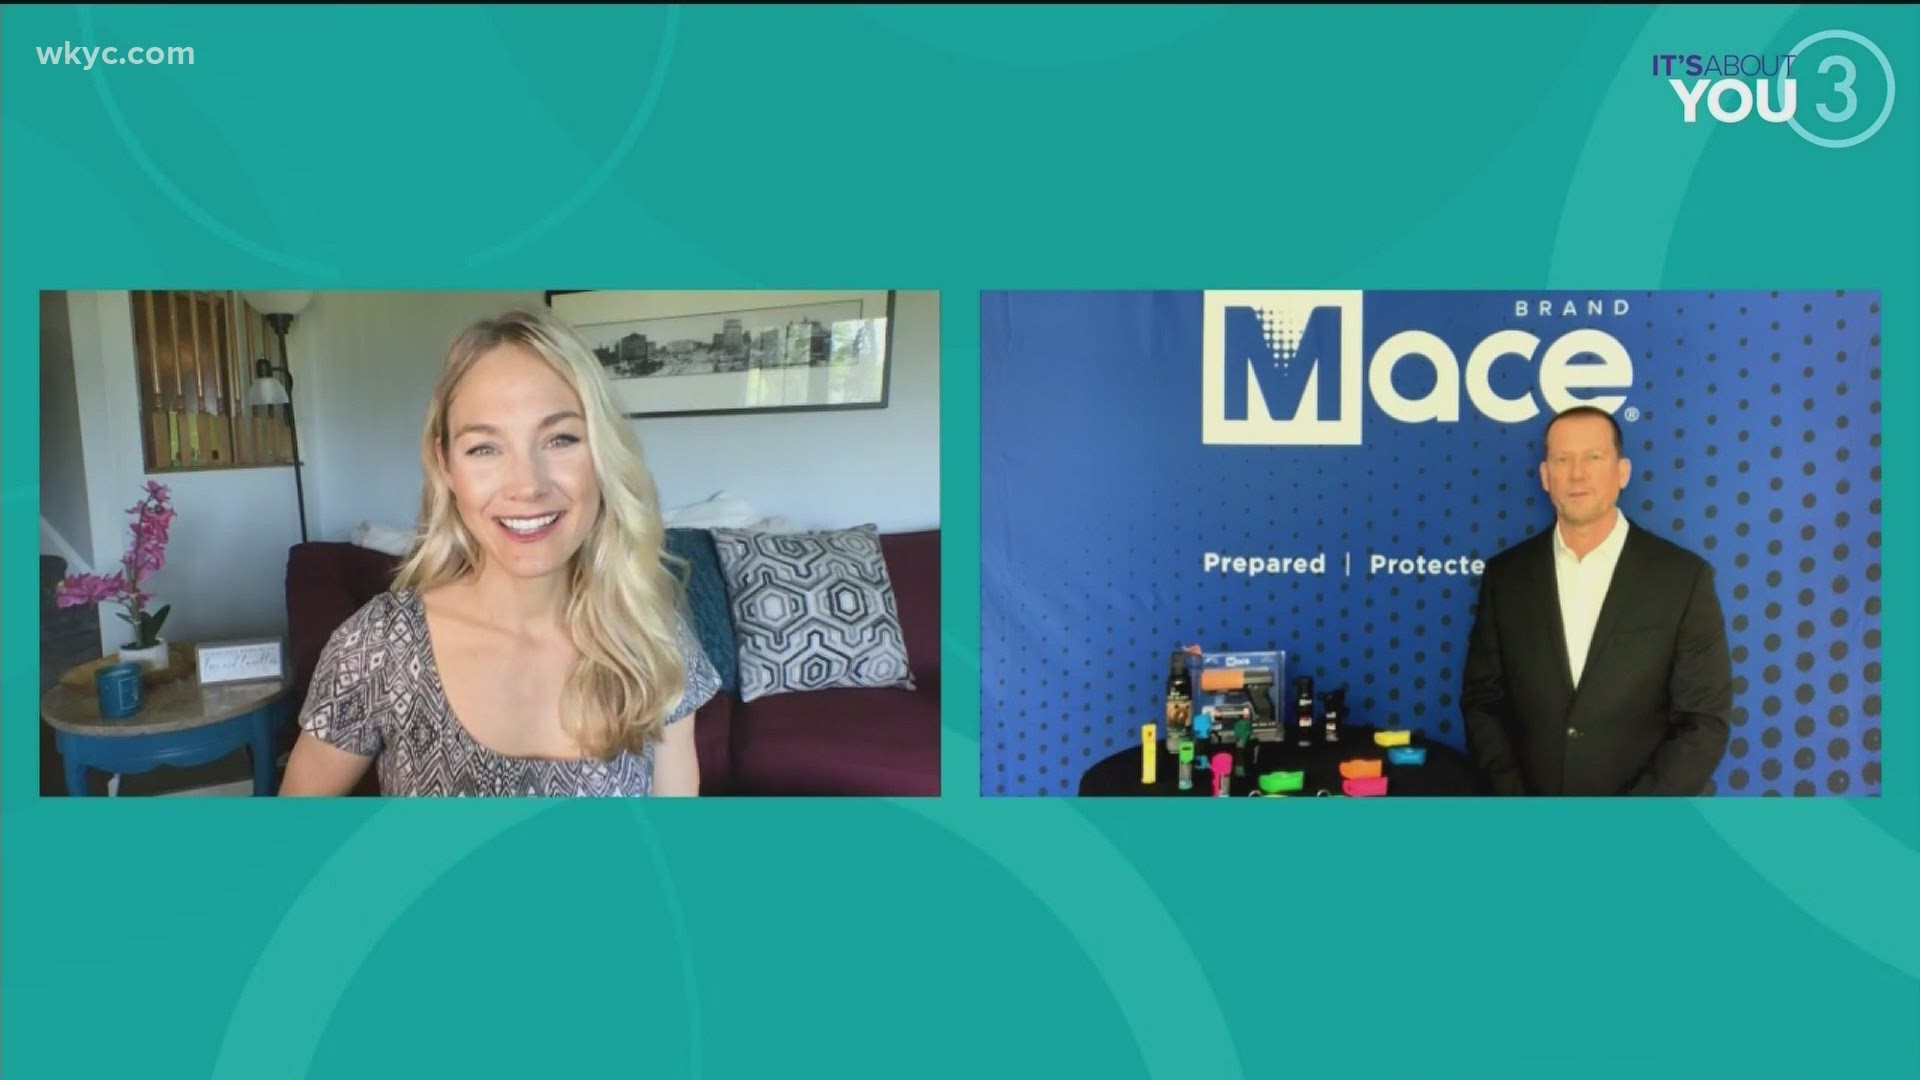 Personal safety is so important so today Alexa is talking with Gary Medved, CEO of Mace, about the different ways their company and products can protect us!